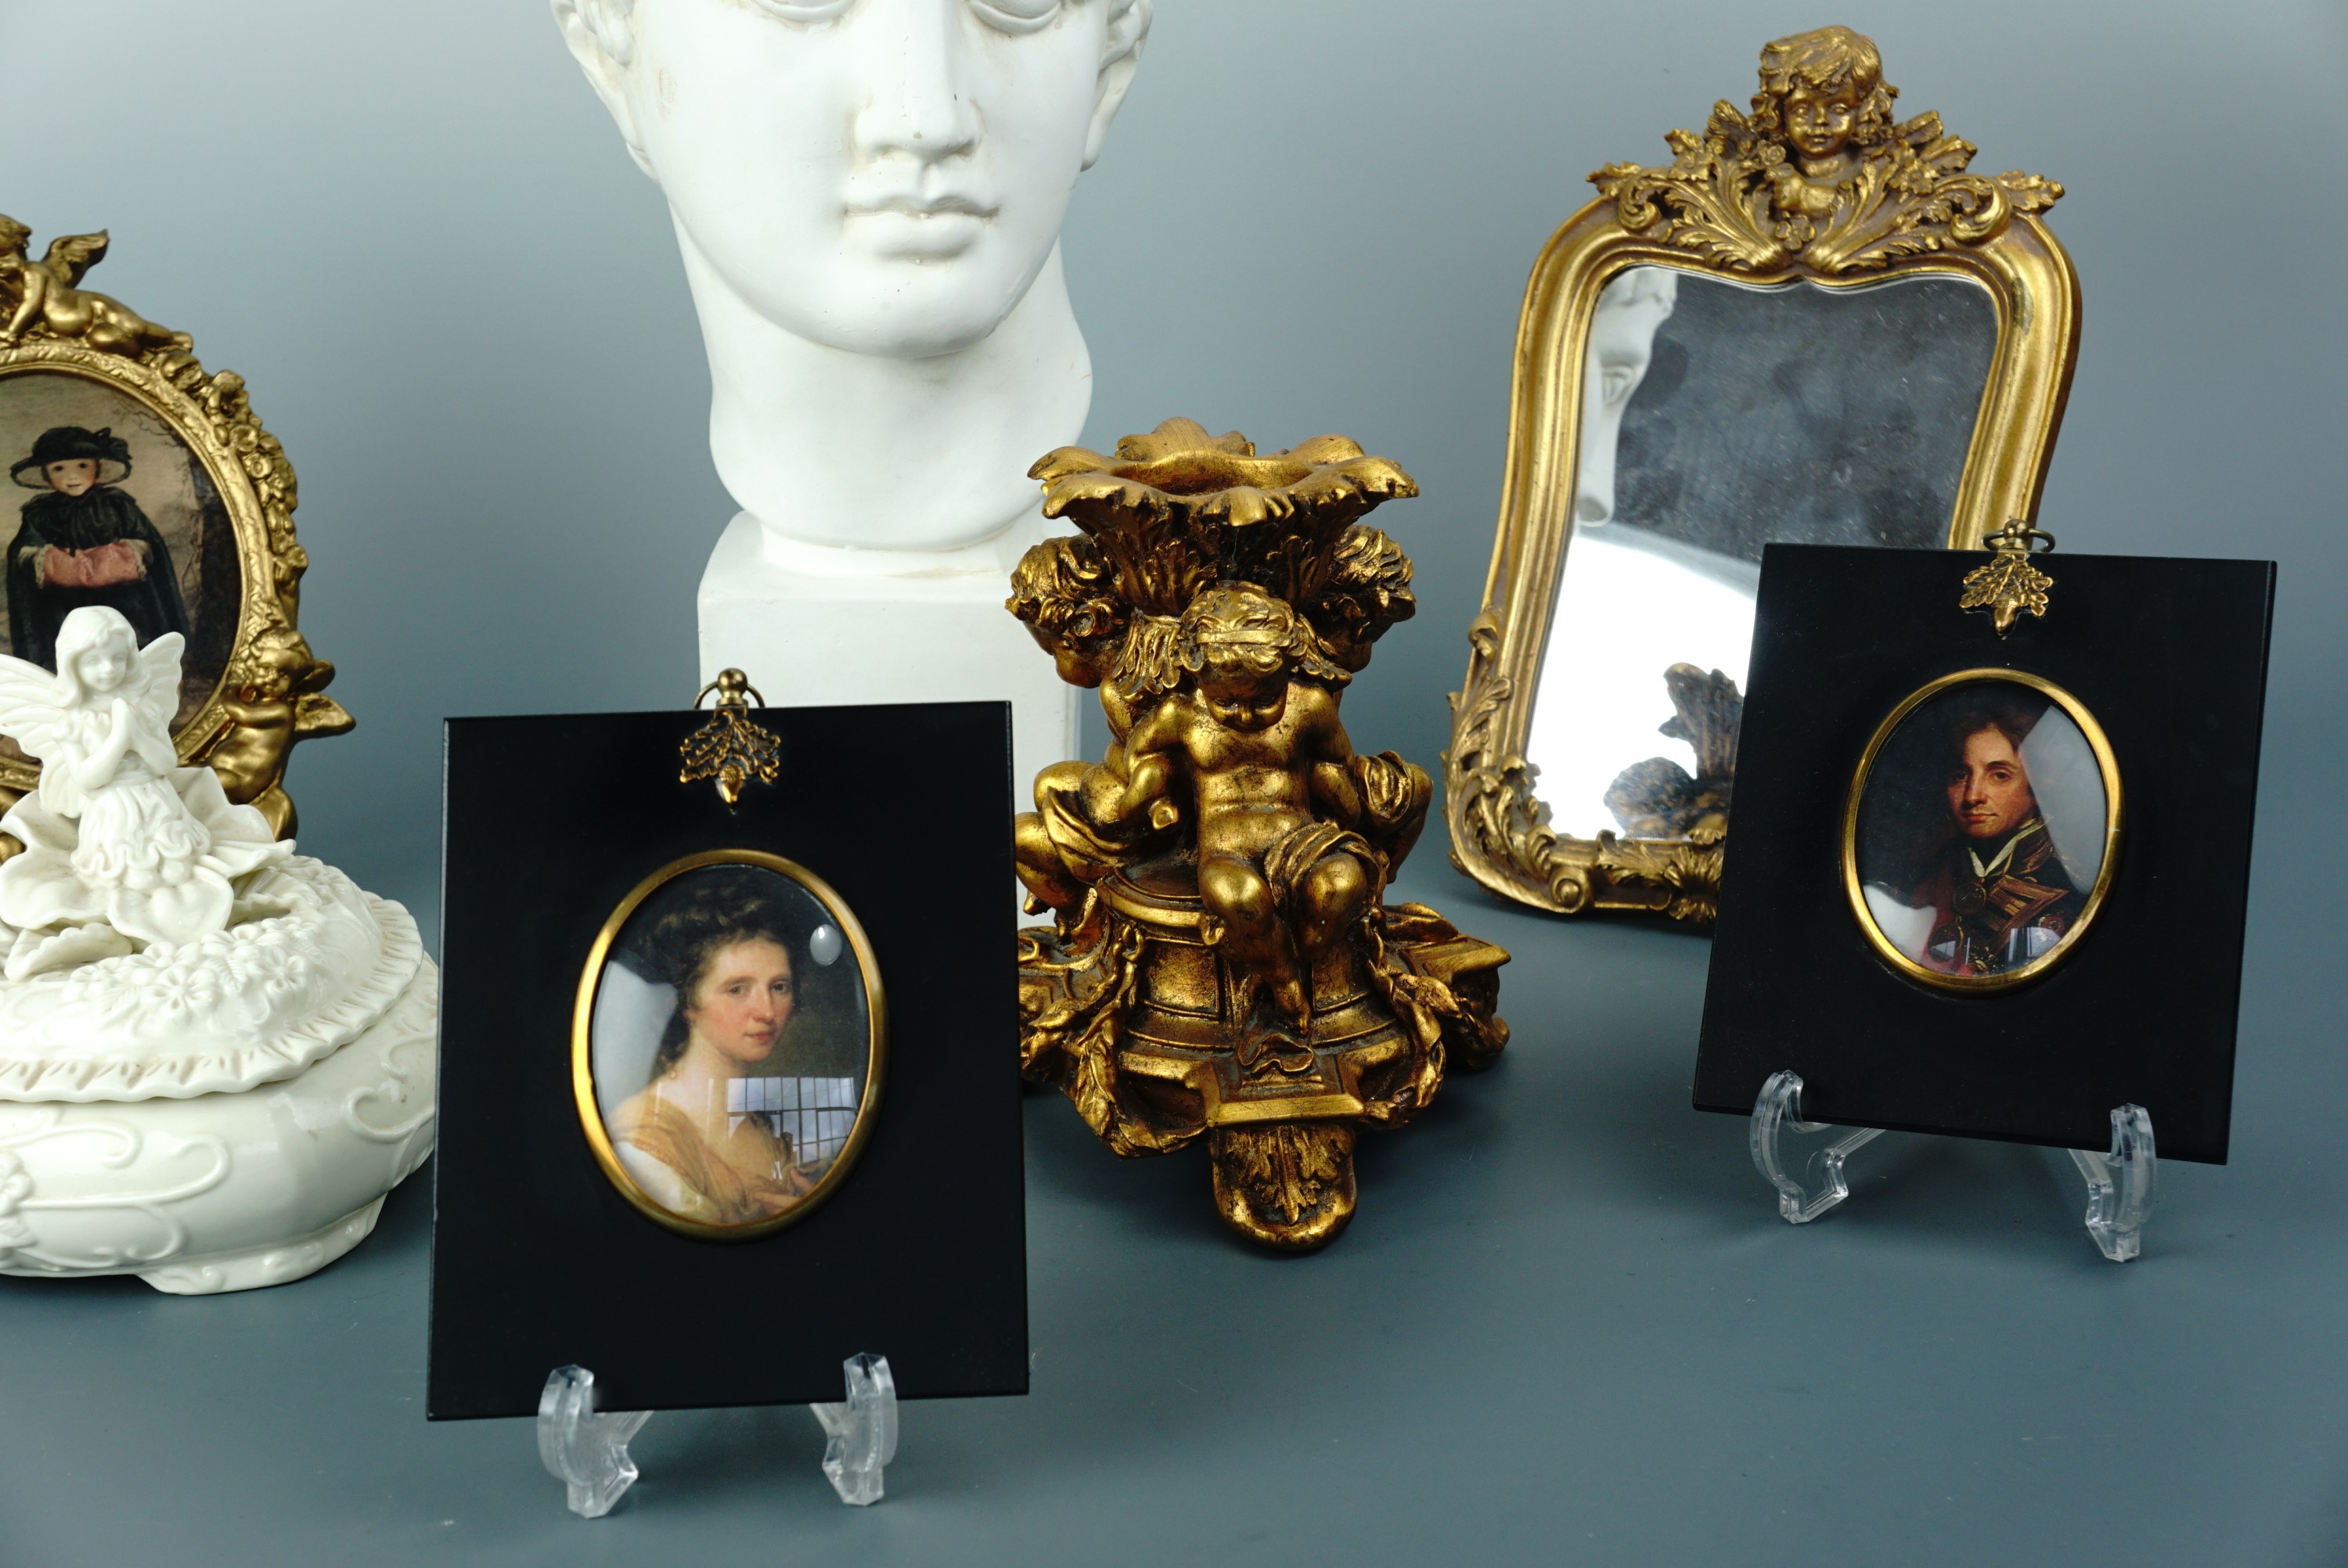 Contemporary decorative furnishing items including a reproduction classical bust, portrait - Image 5 of 5